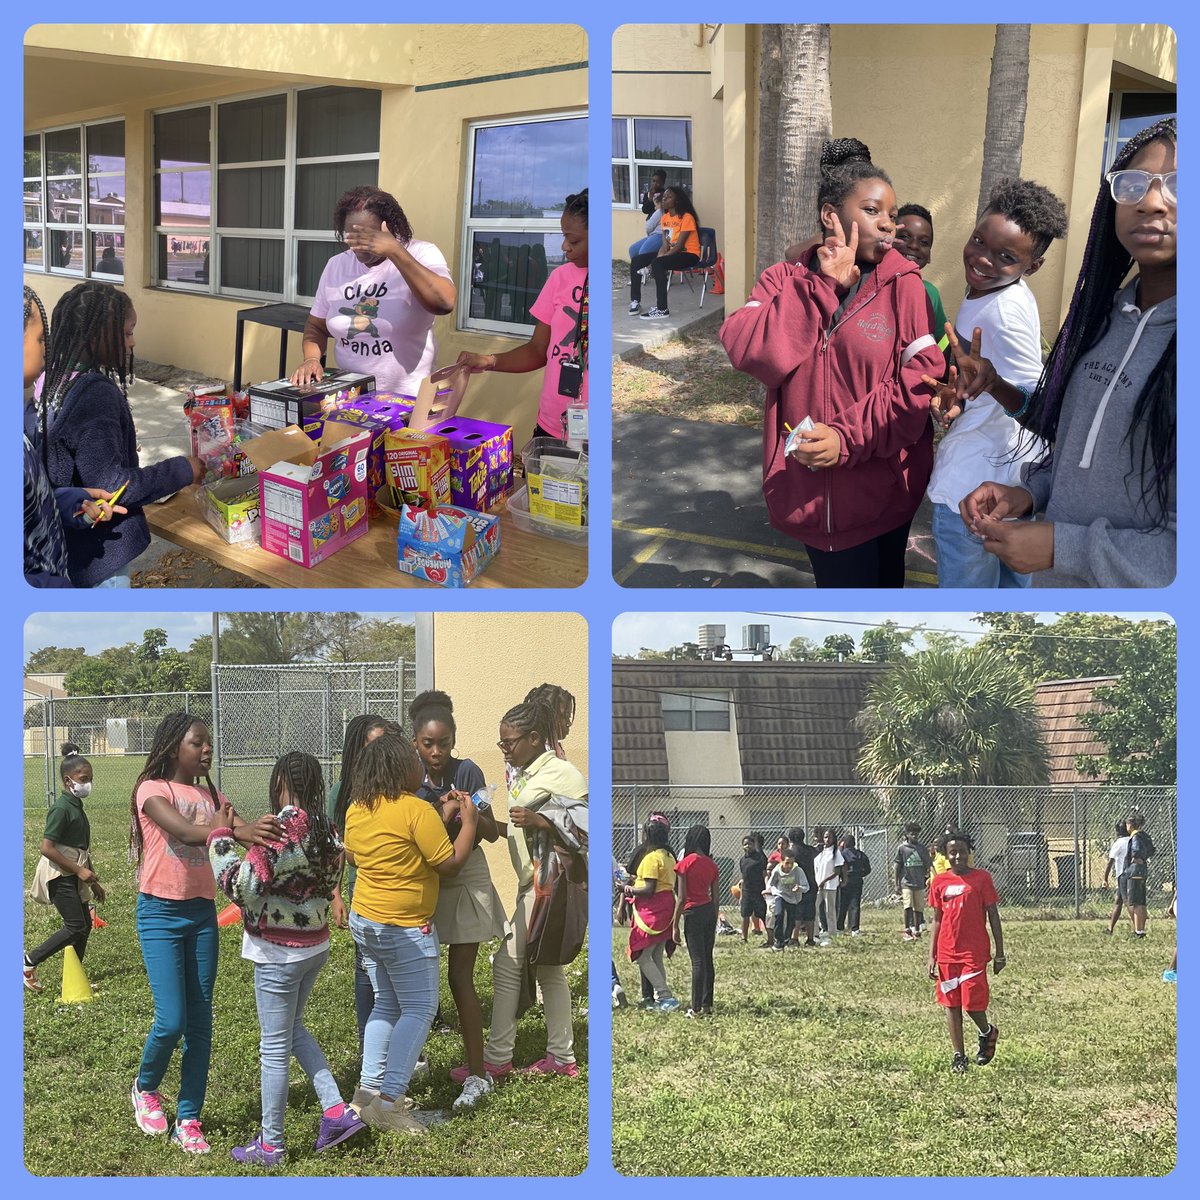 Each month we host Club Panda @RPEMuseummagnet to reward our scholars for displaying kindness and following our Panda Principles. Today we took Club Panda outside! It was a hot but fun time for our scholars. @PrincipalDarby1 @BcpsCentral_ @Mrs_Kessler2020